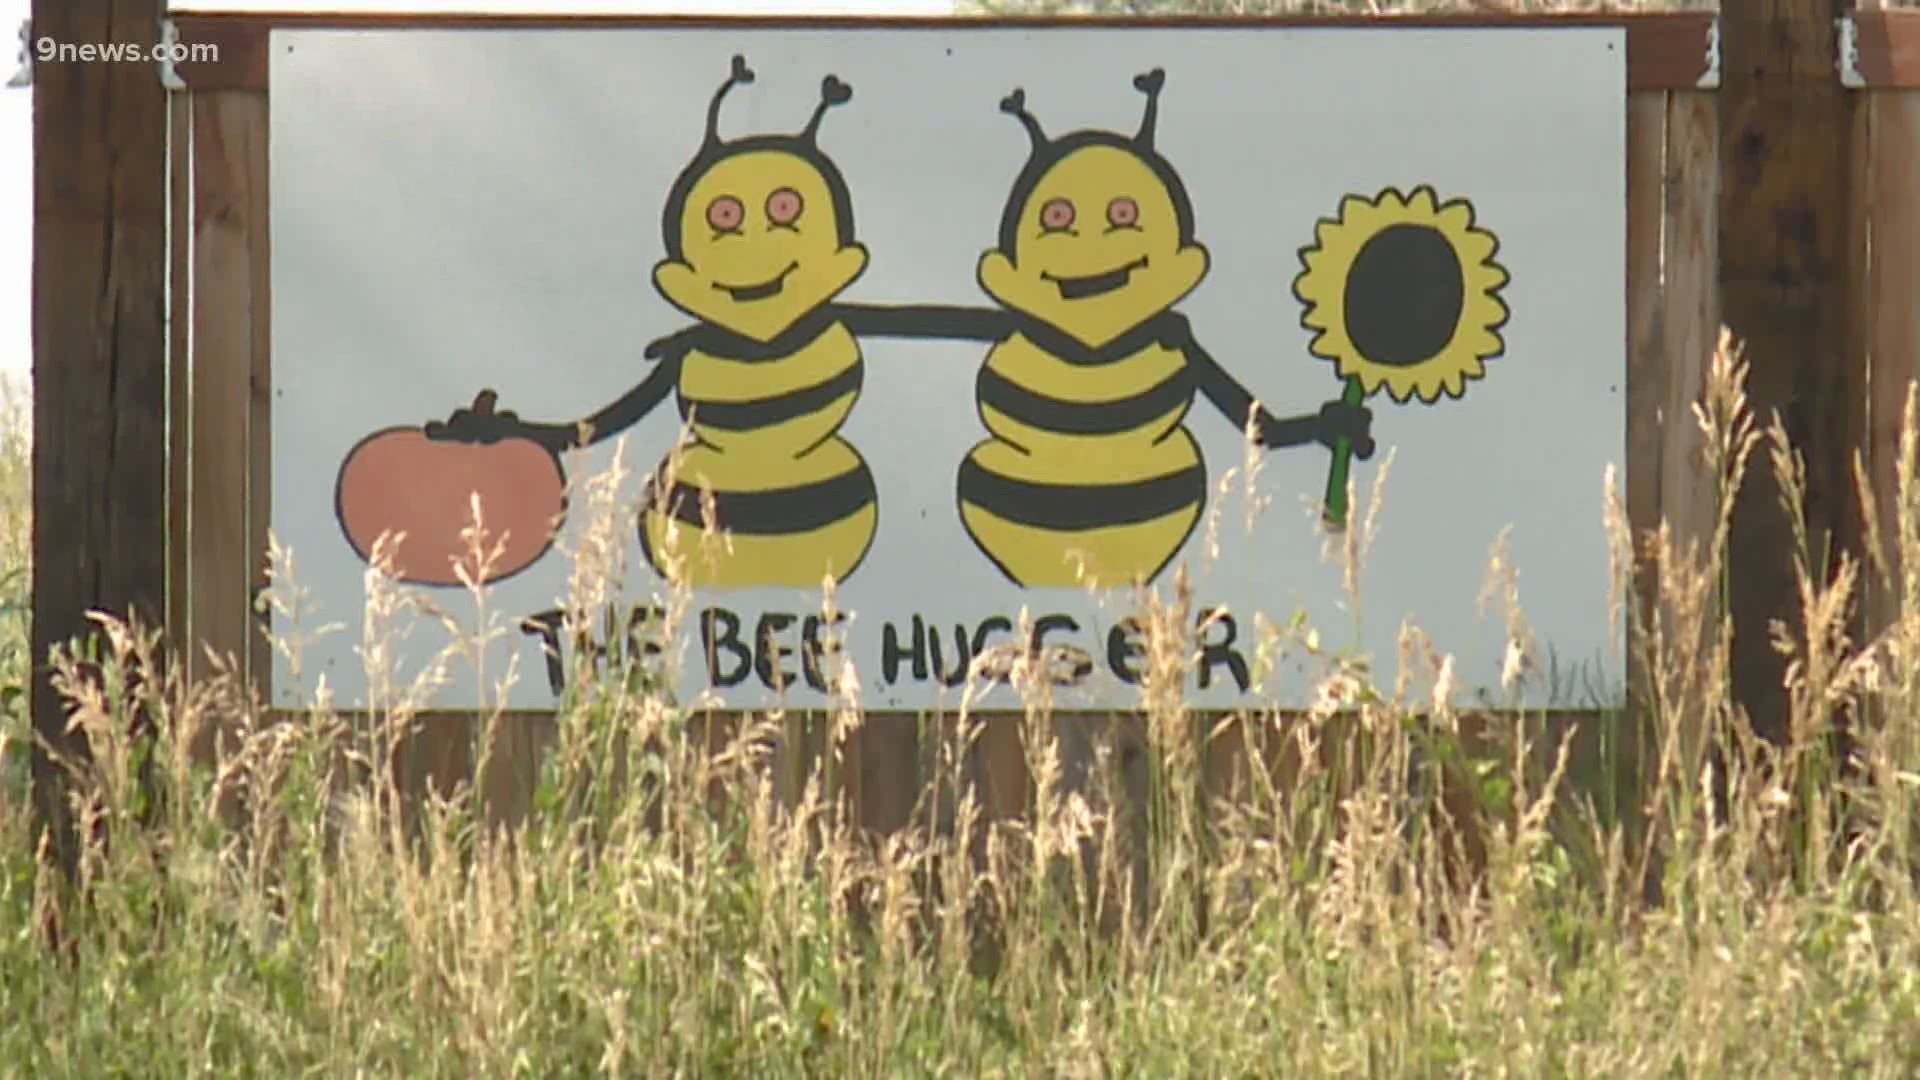 Bee Hugger Farm in northeast Longmont encourages people to visit and is now working on growing pumpkins.